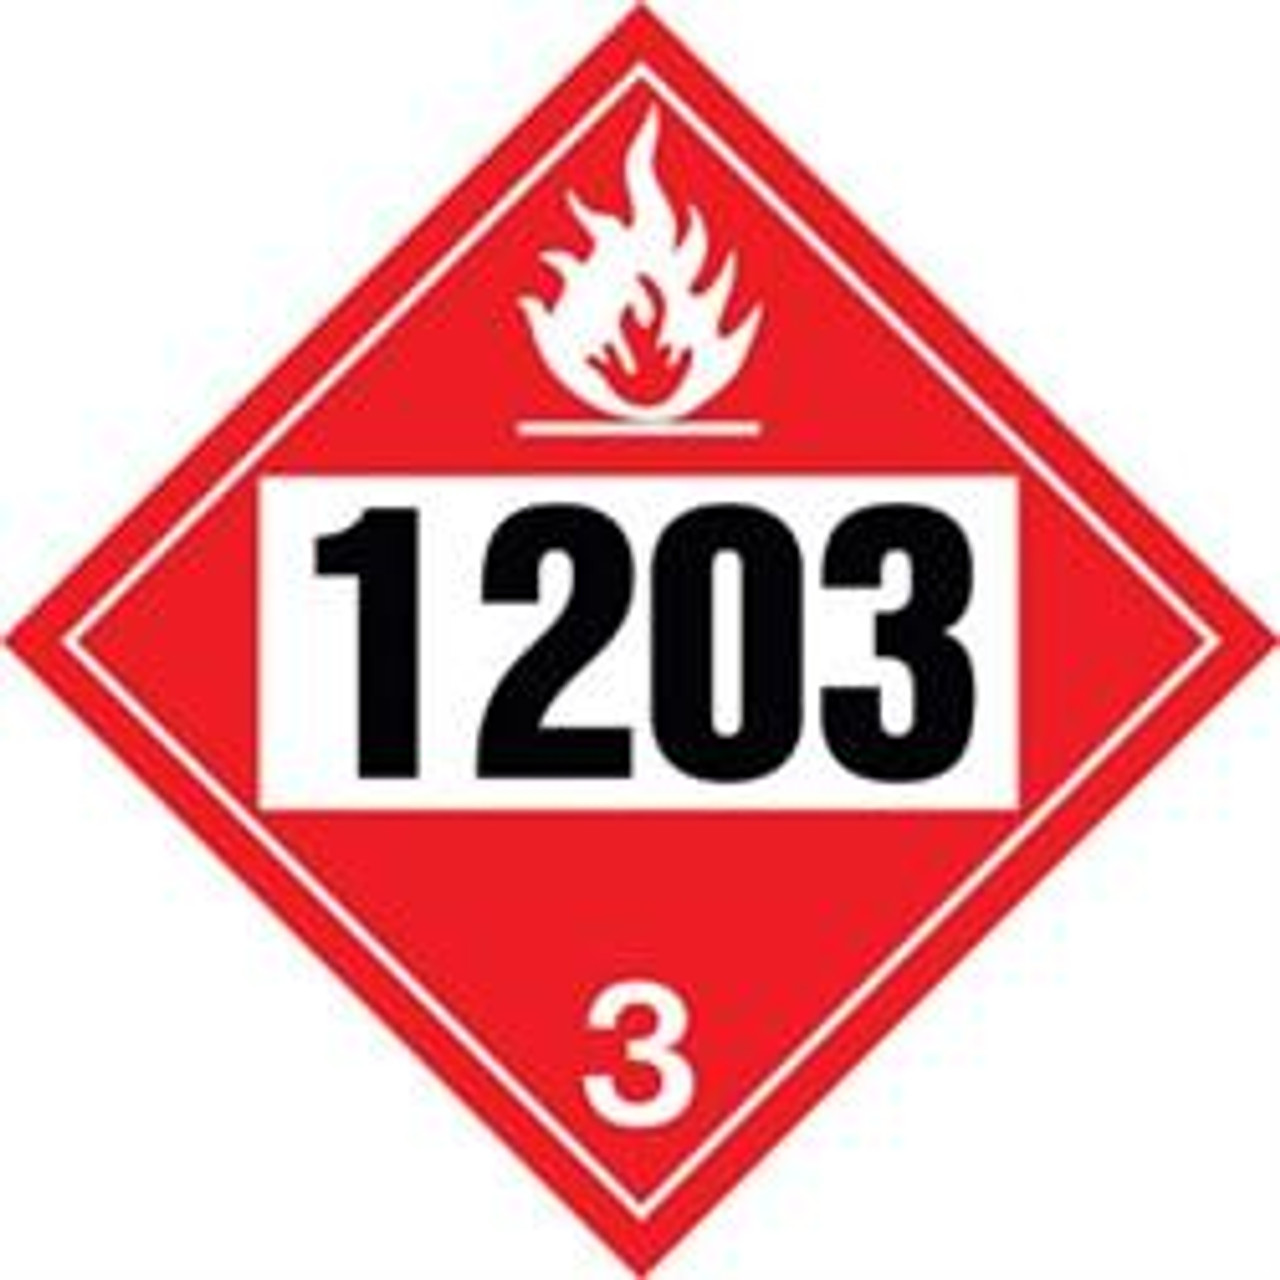 TD-1203 - Truck Decal - Gasoline Gasohol Petrol Flammable Combustion